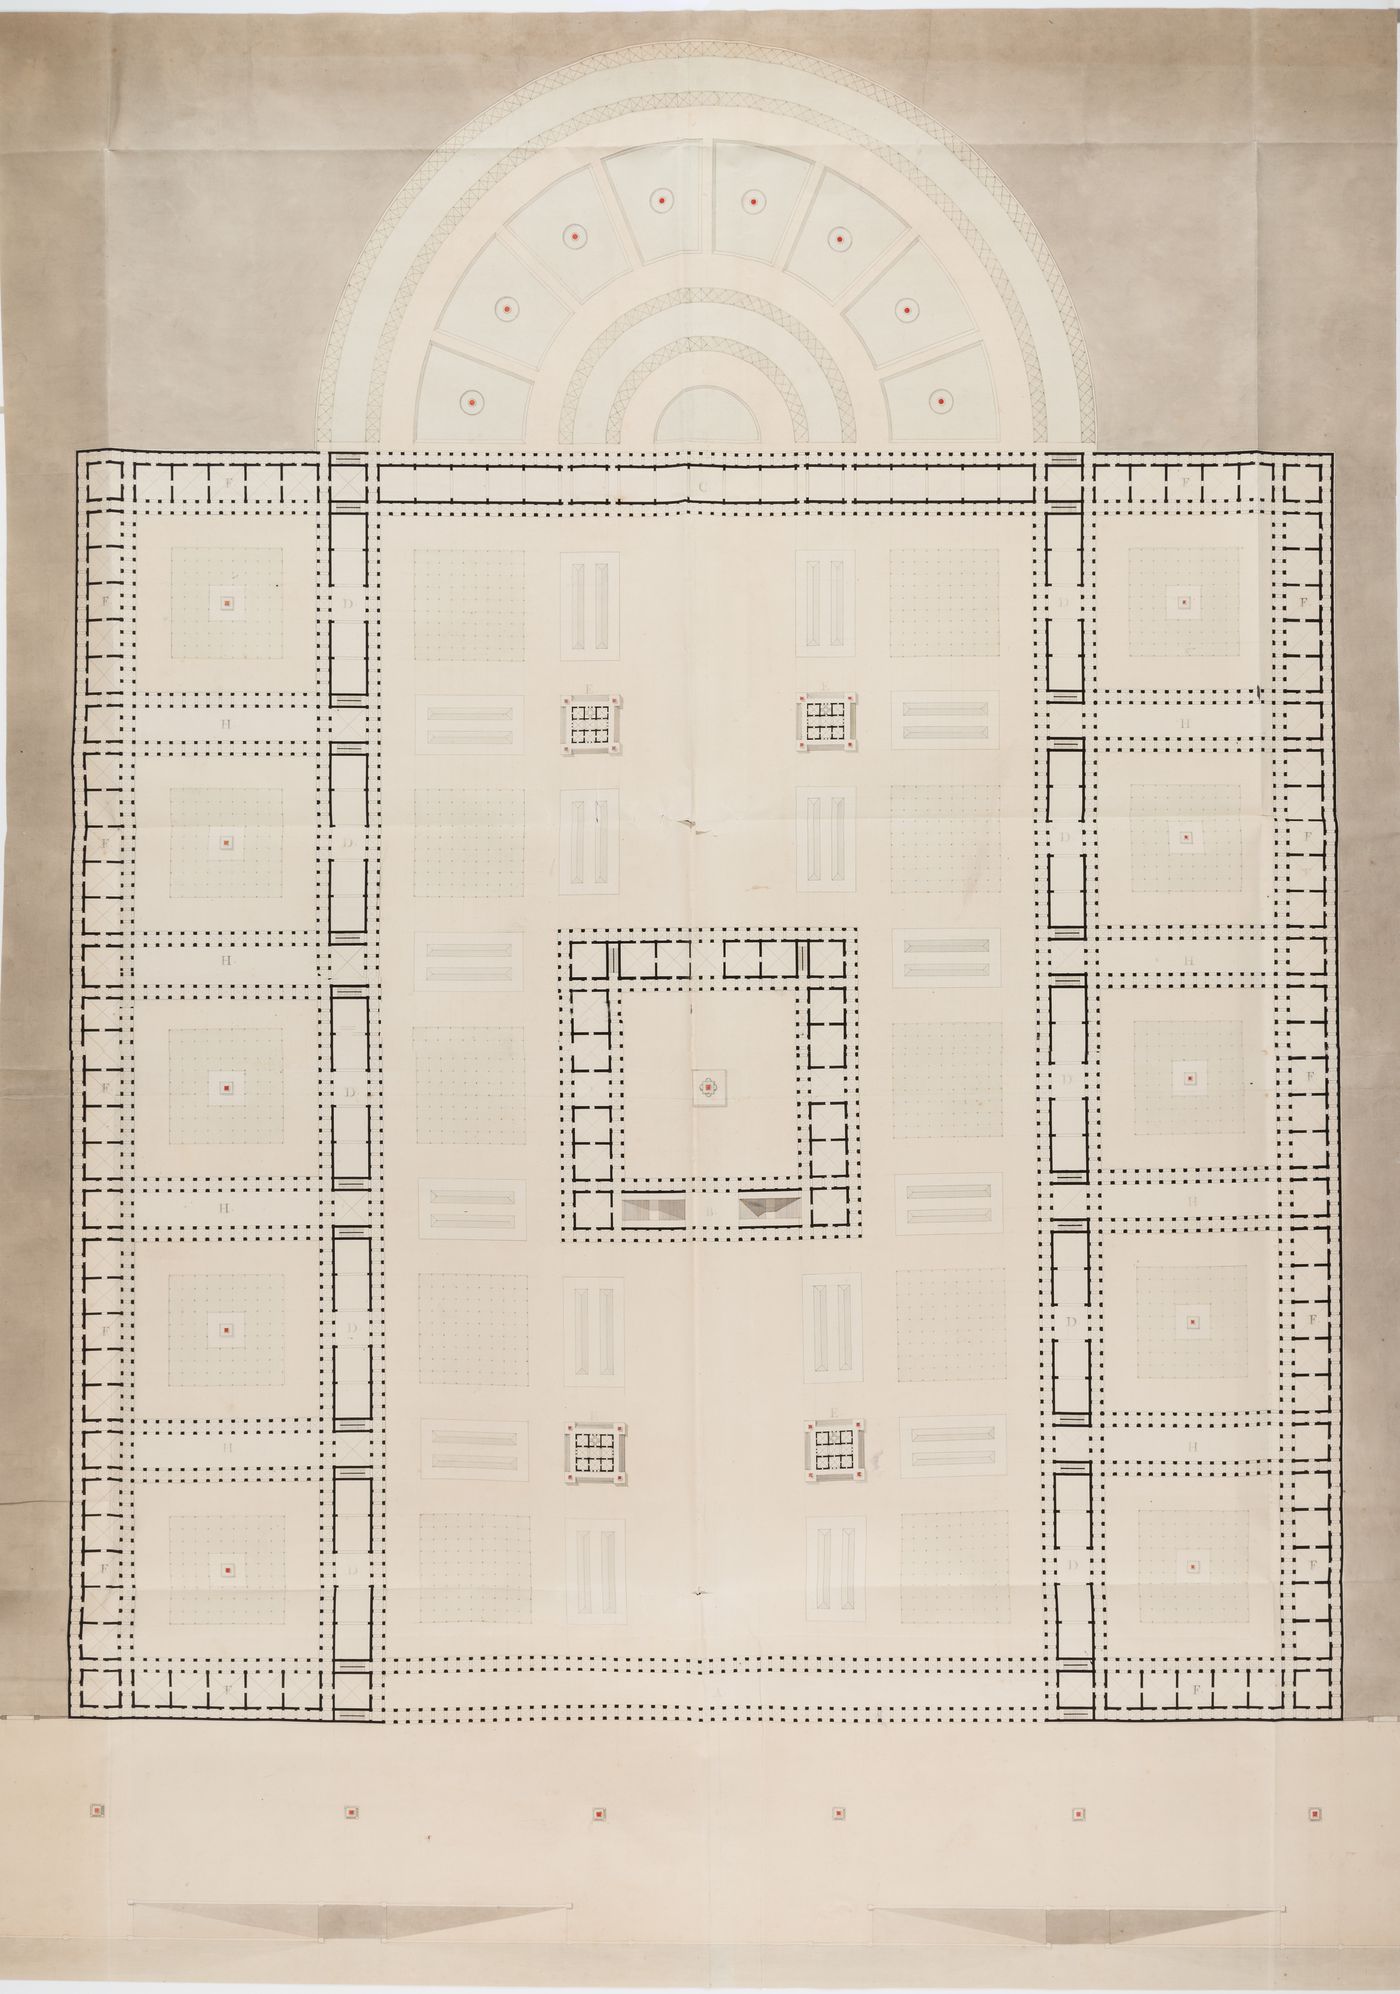 Ground plan, possibly for a warehouse